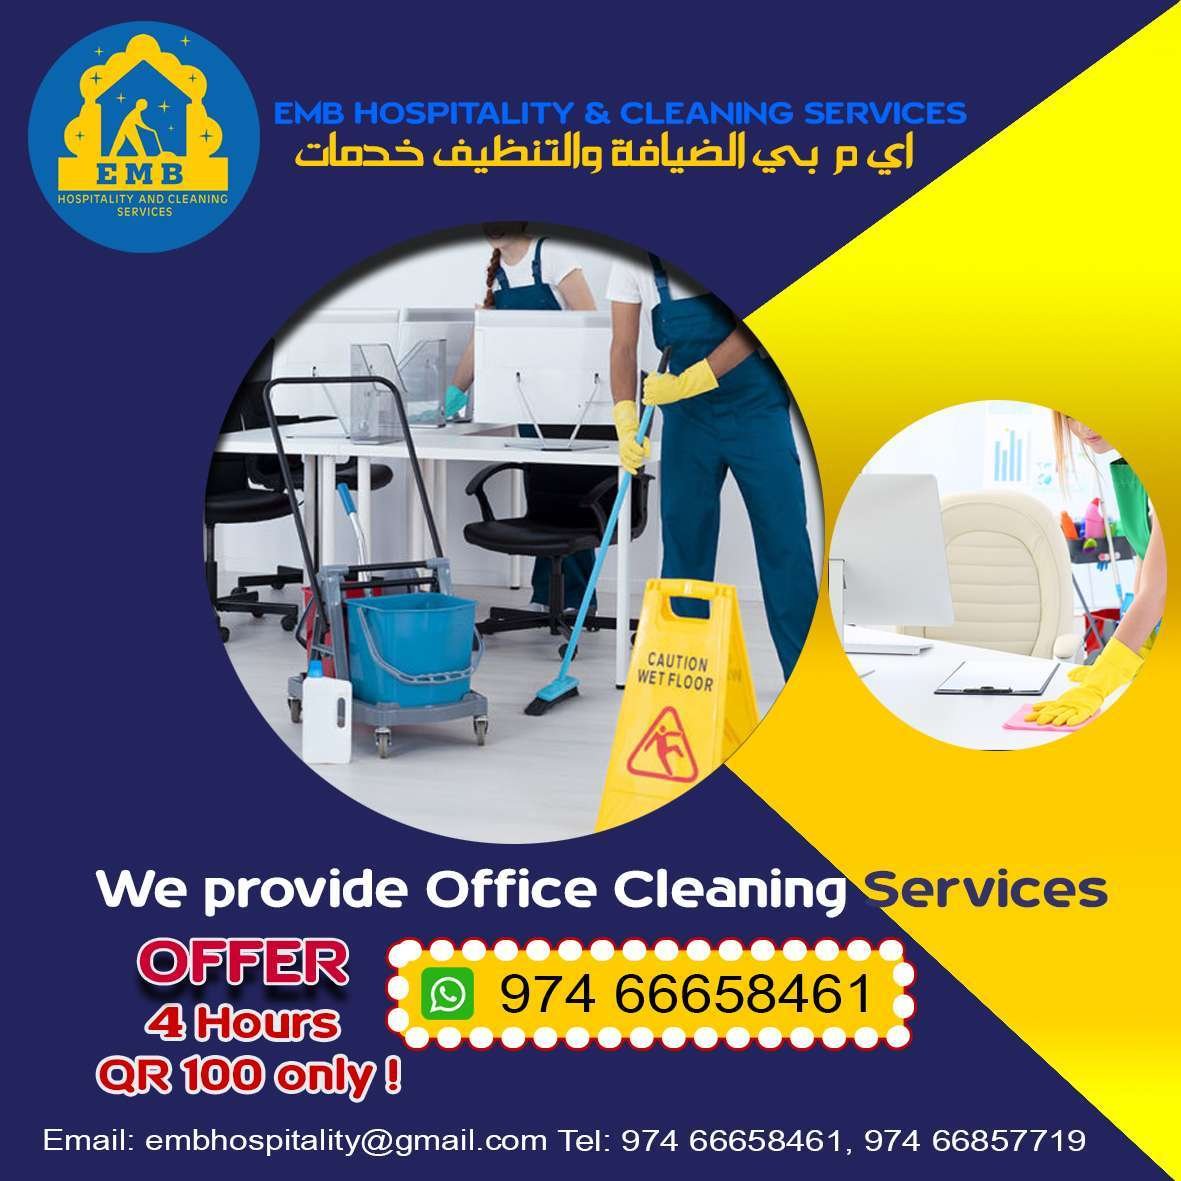 EMB Hospitality and Cleaning Services